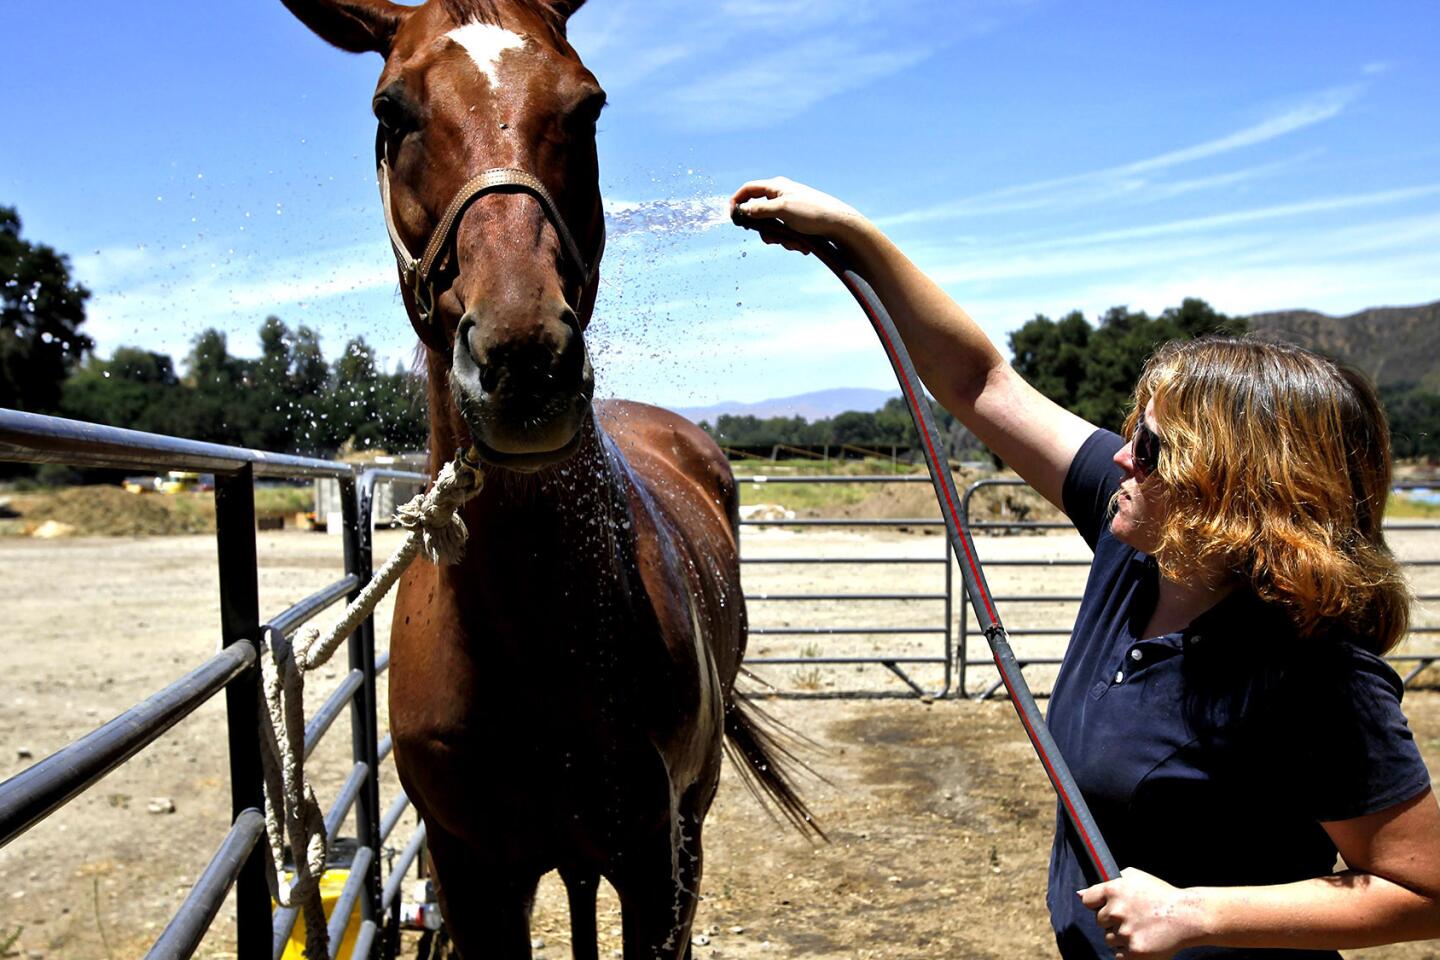 Horse going to greener pastures after owner's heartbreaking tragedy